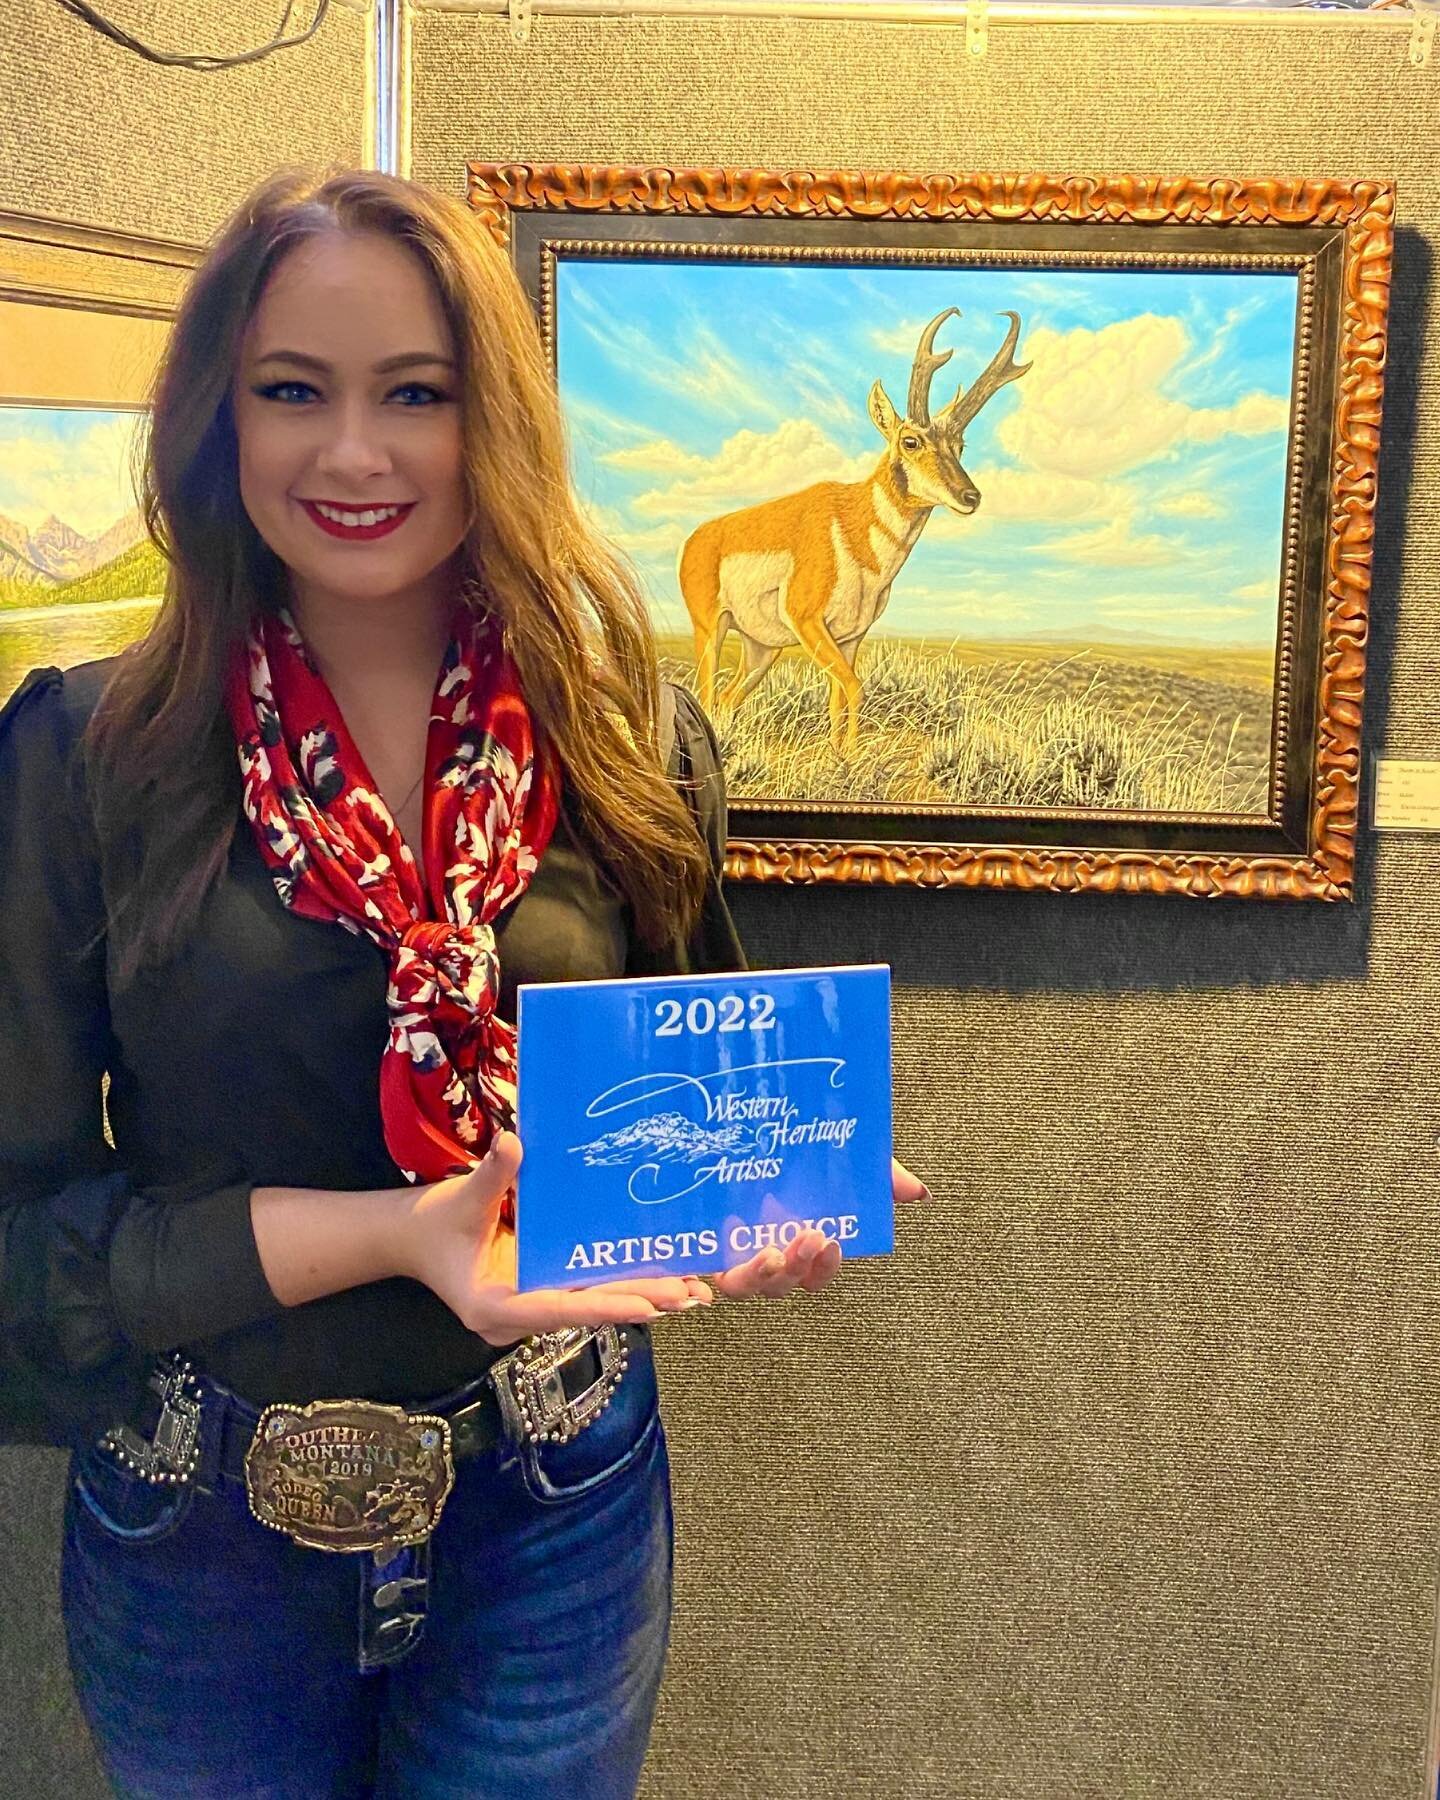 Among many talented artists, I&rsquo;m so honored to have been voted Artists Choice with my original piece &ldquo;Room to Roam&rdquo; at the @western_heritage_artshow!

#antelope #art #artist #artshow #cowboyart #cowgirlart #fineart #montana #montana